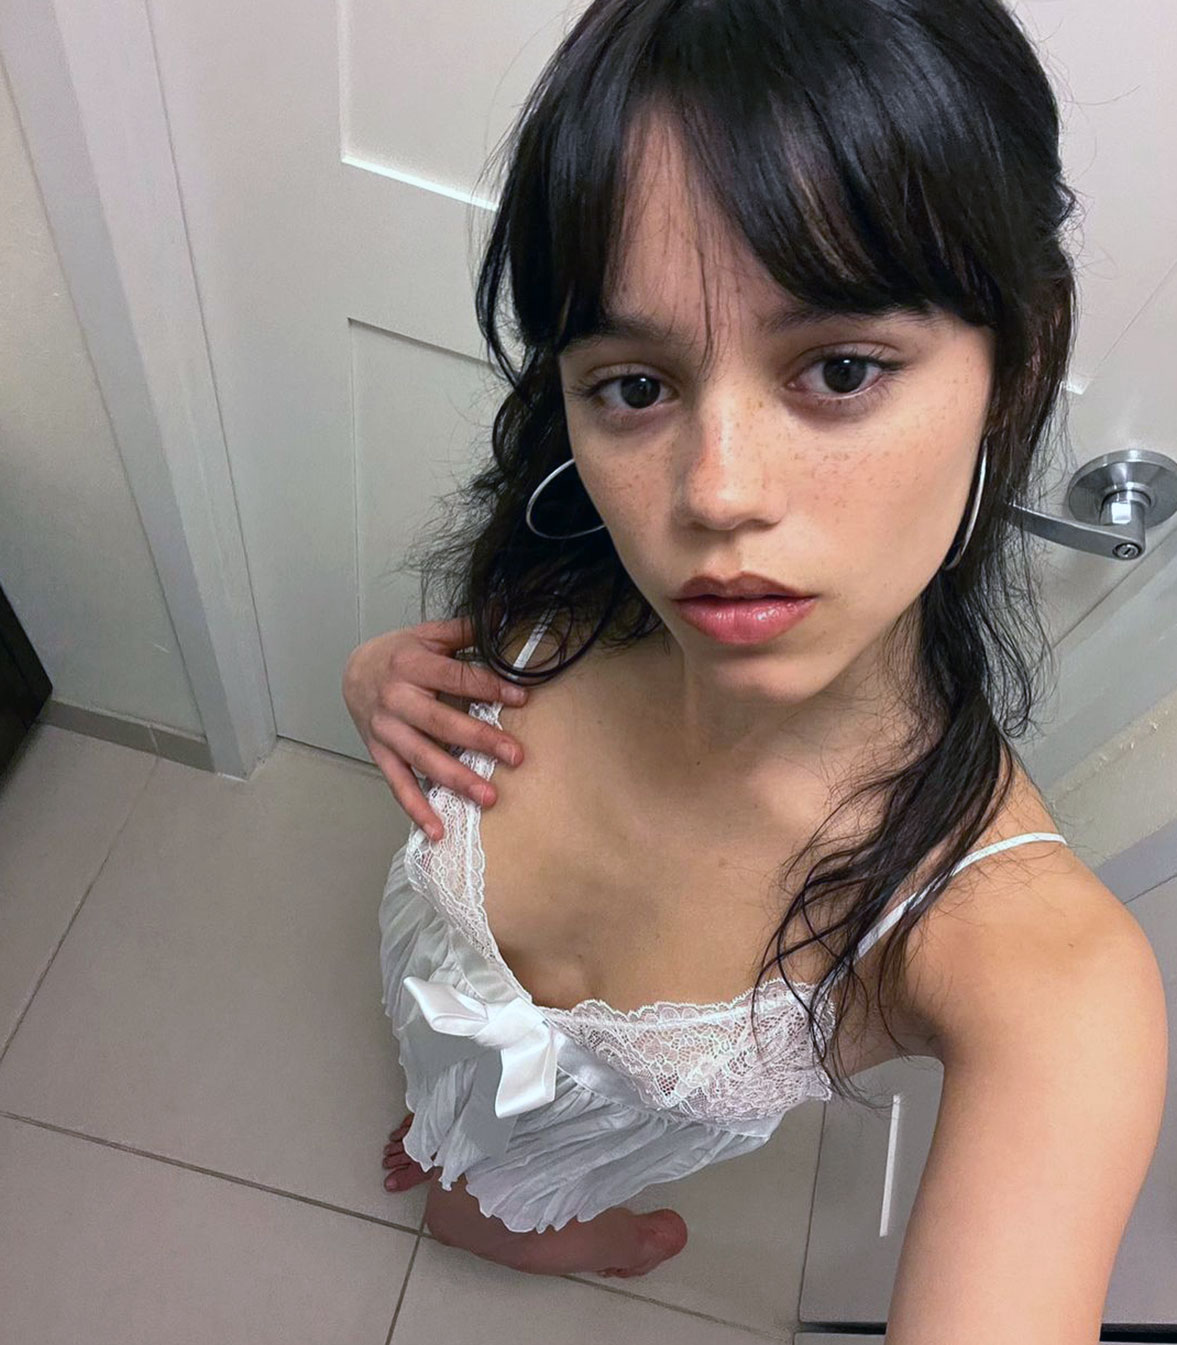 Nude Exposed - Jenna Ortega Nude Photos and LEAKED Porn - Scandal Planet